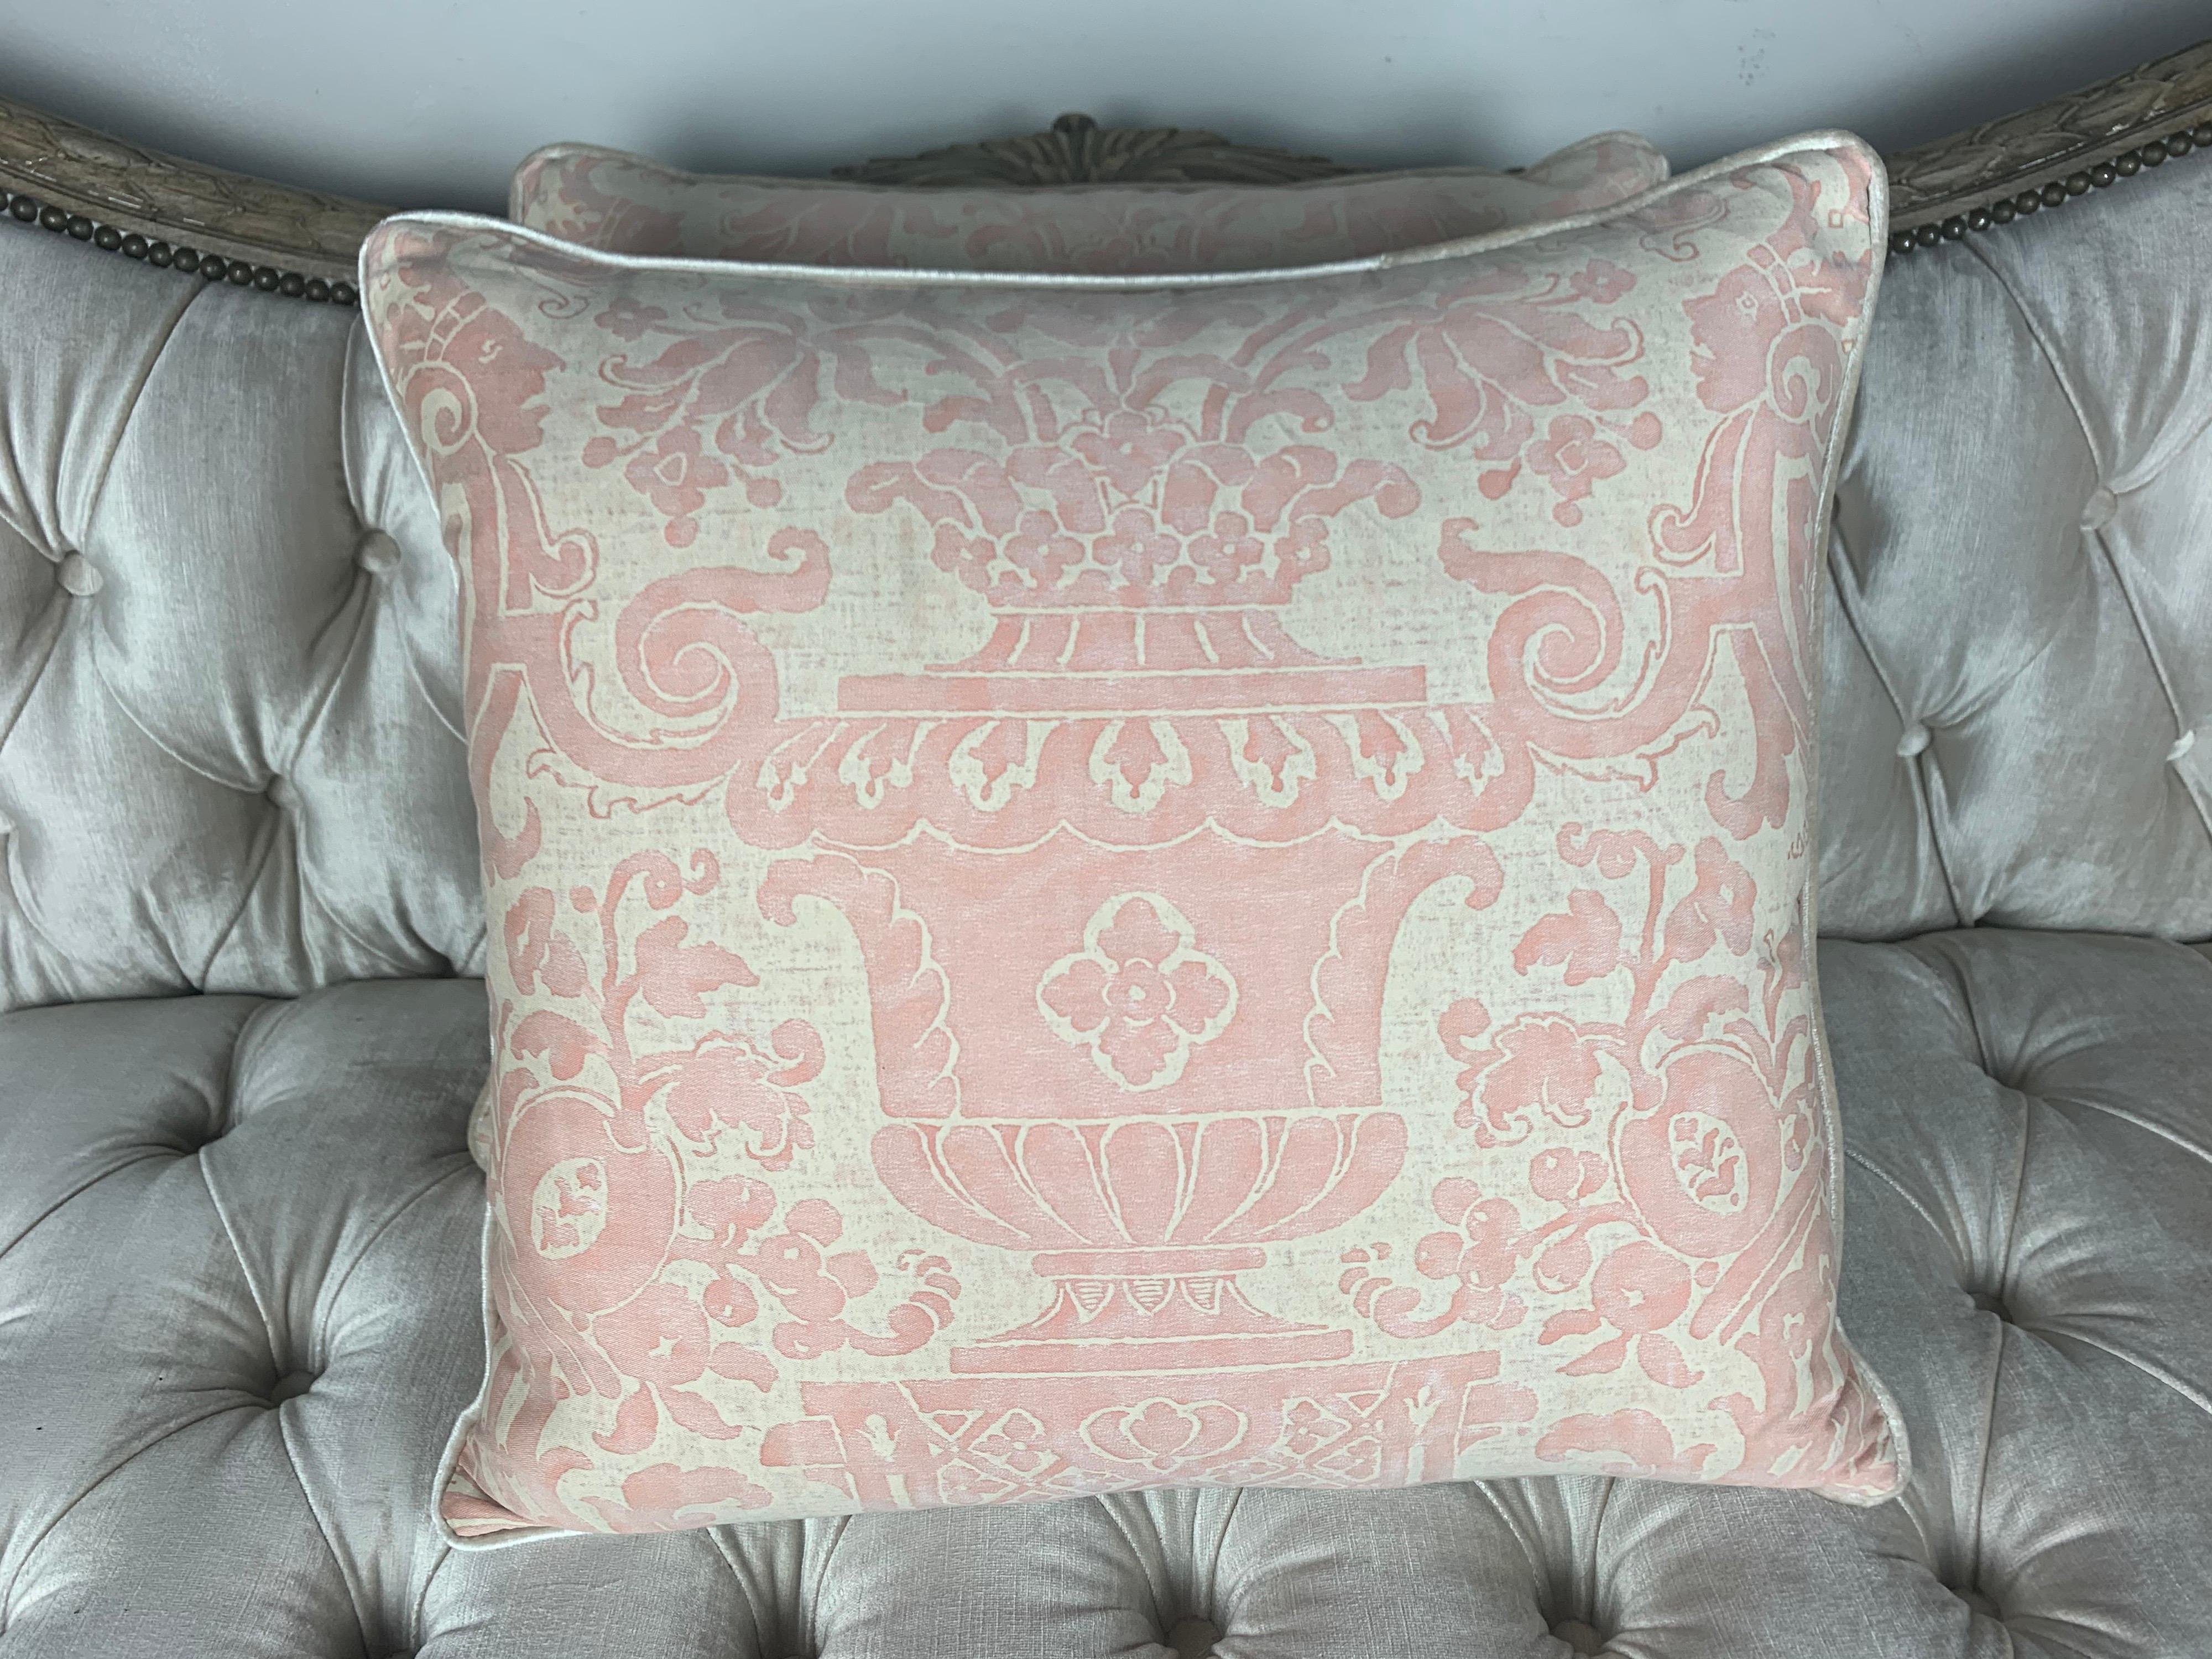 Pair of custom pillows made with authentic vintage Carnevalet patterned soft pink and white Fortuny textile fronts and silver colored velvet backs. Self cord detail. Sewn closed.